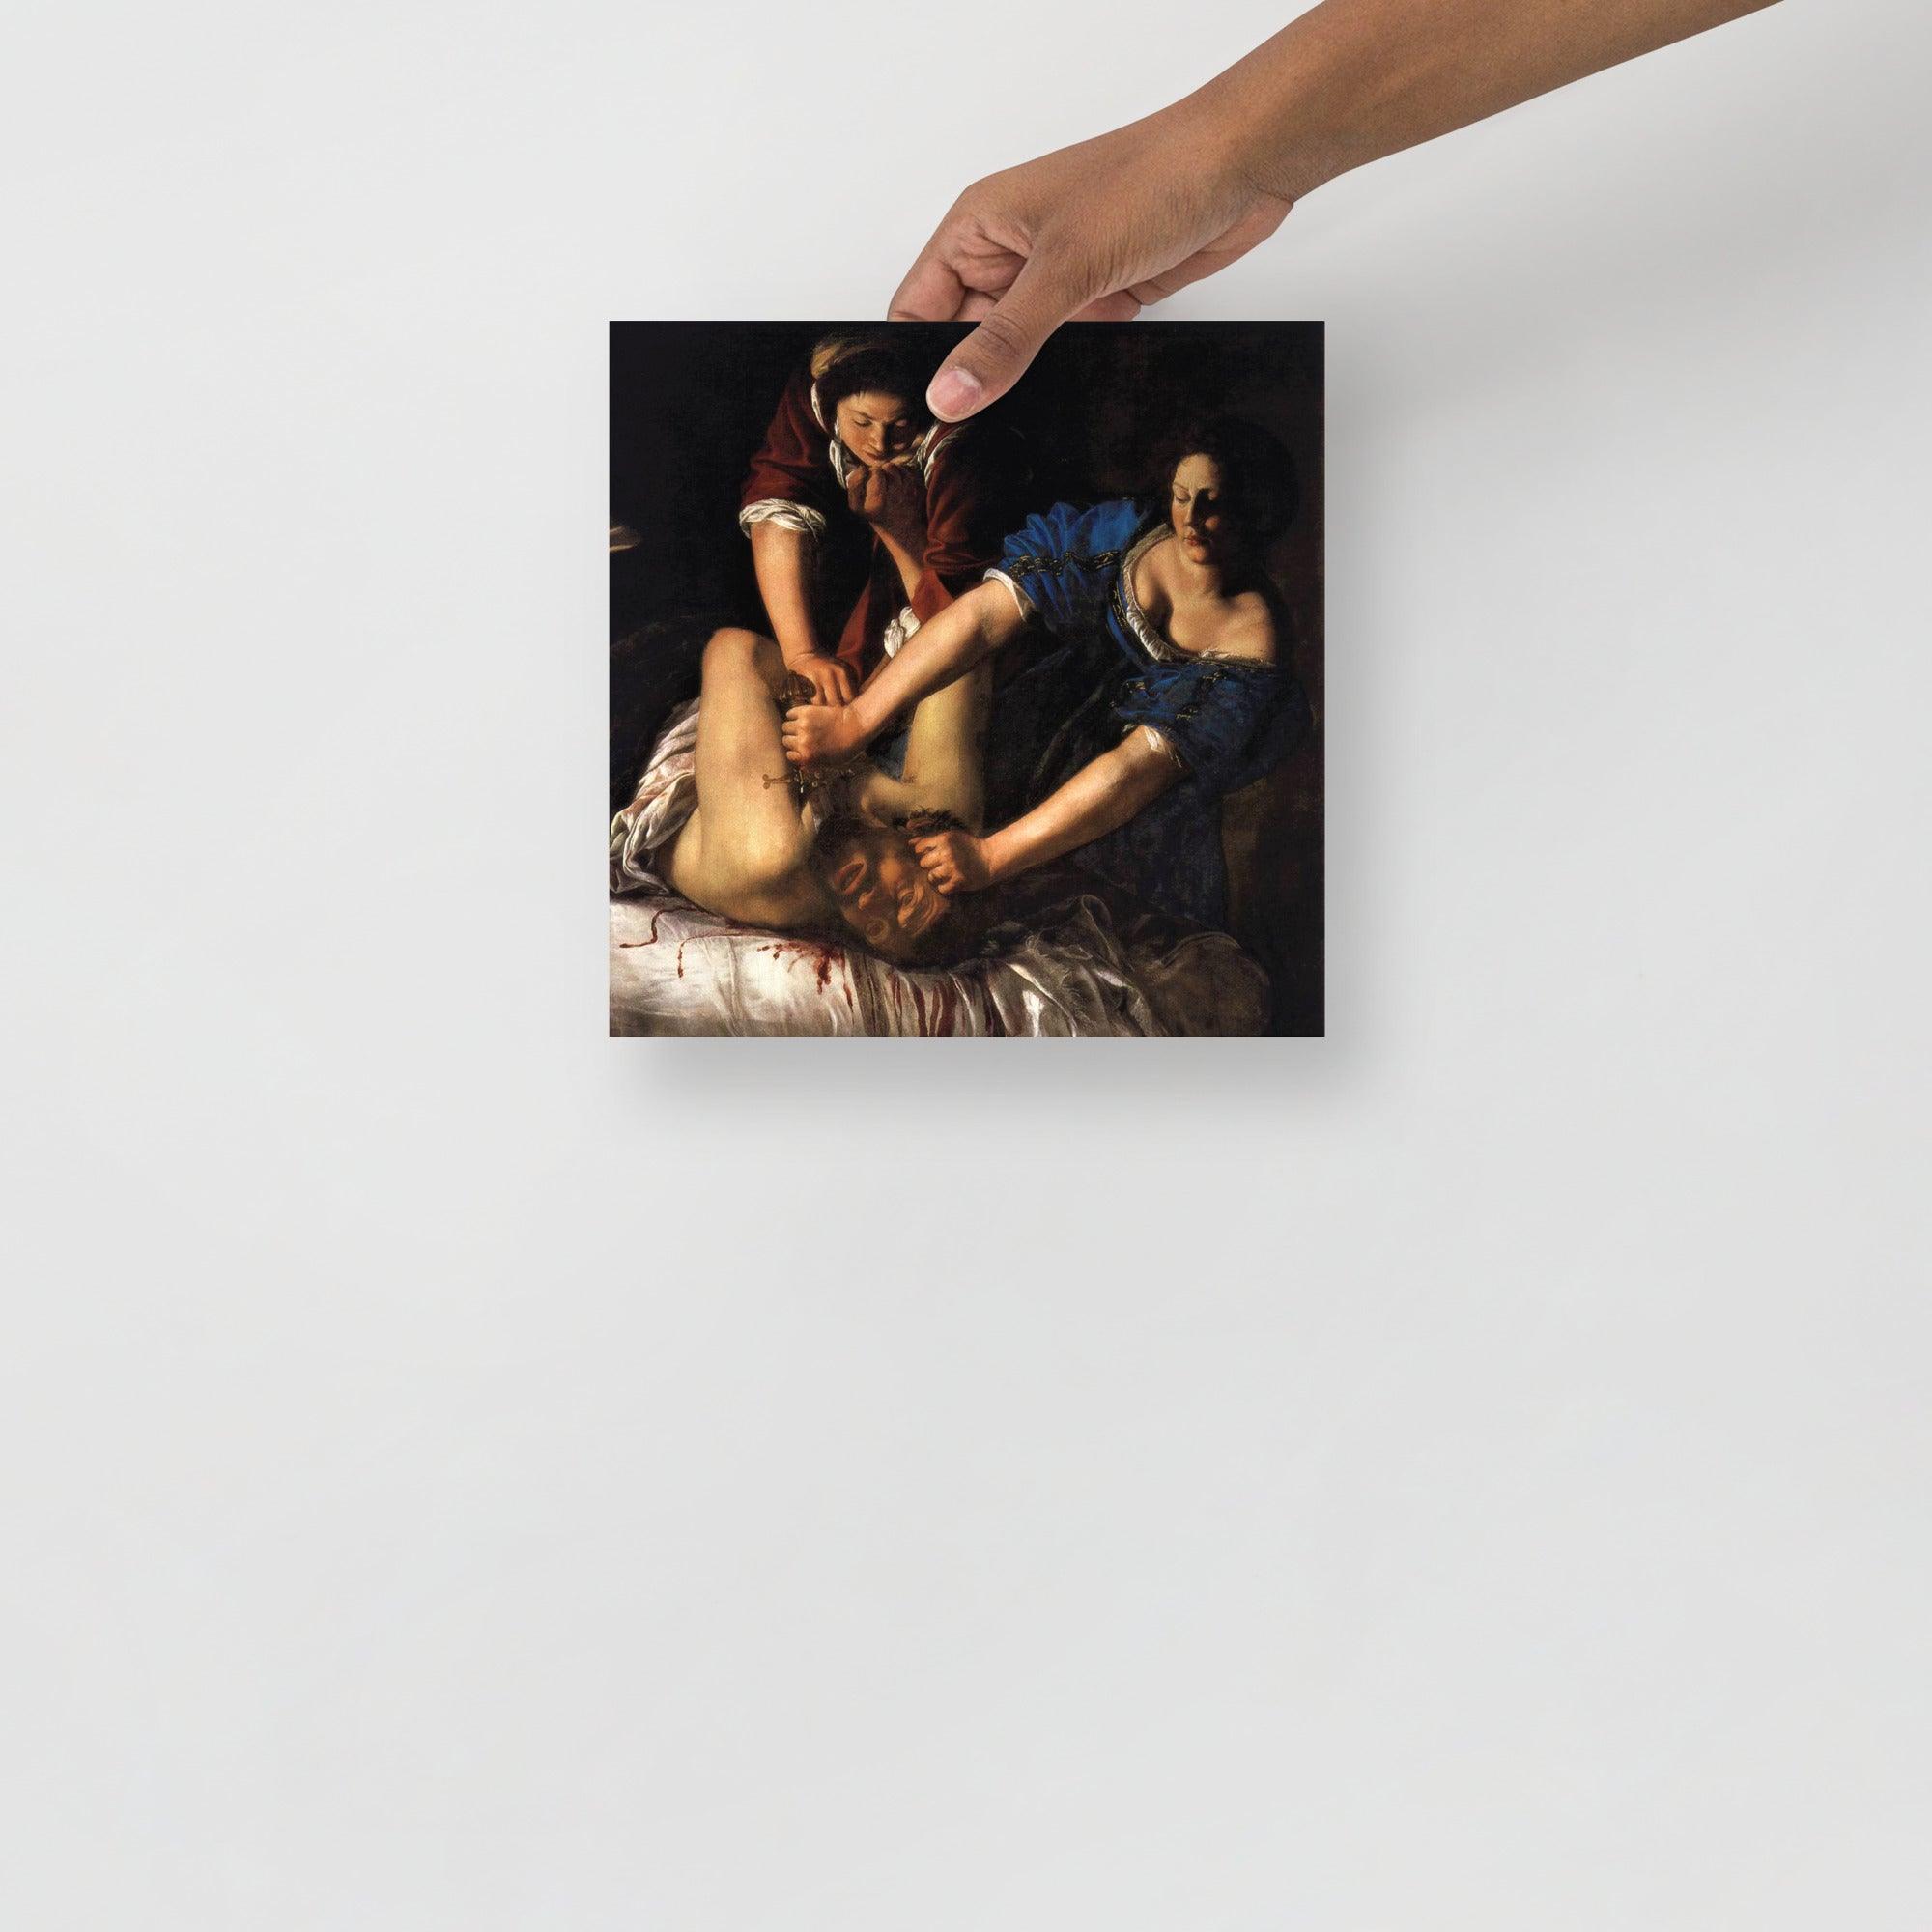 A Judith beheading Holofernes by Artemisia Gentileschi poster on a plain backdrop in size 10x10”.